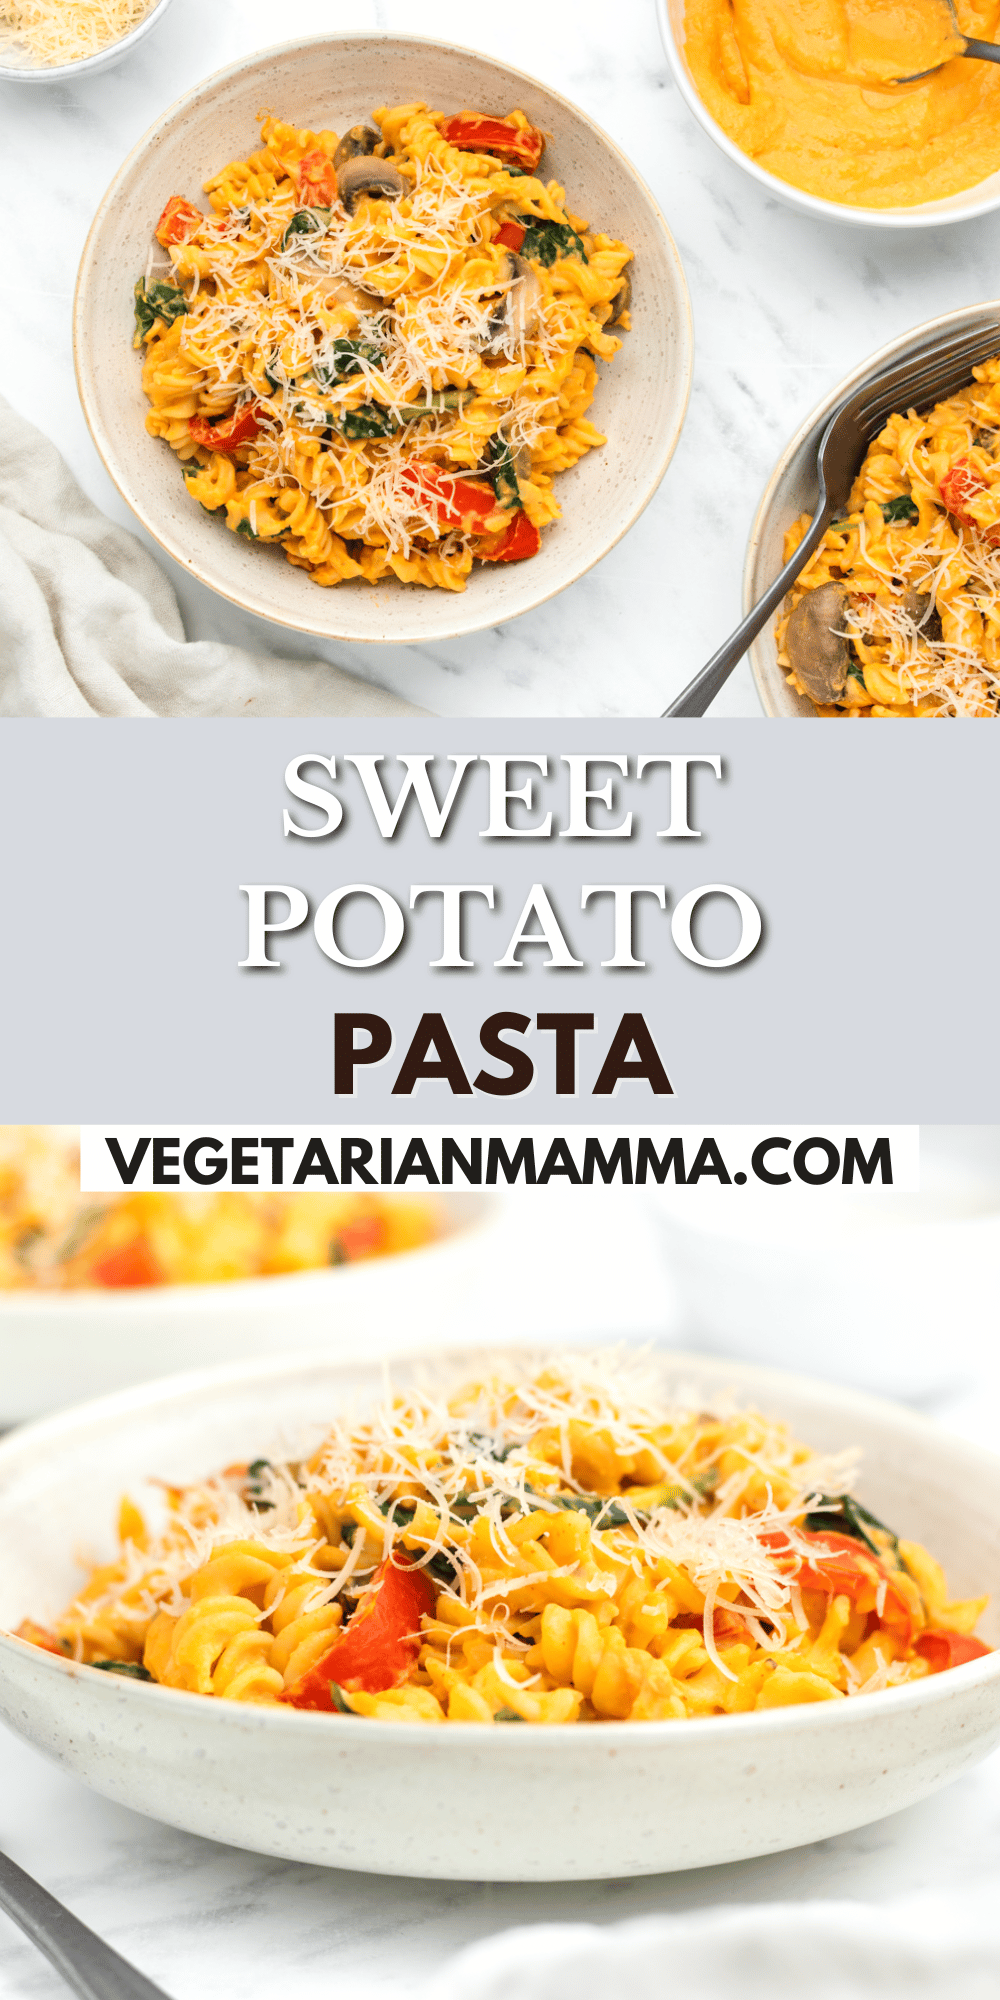 This healthy sweet potato pasta is completely delicious and super simple to make! Packed with veggies both in the dish, and blended into the sauce, it's a nutritious meal that the whole family will devour.